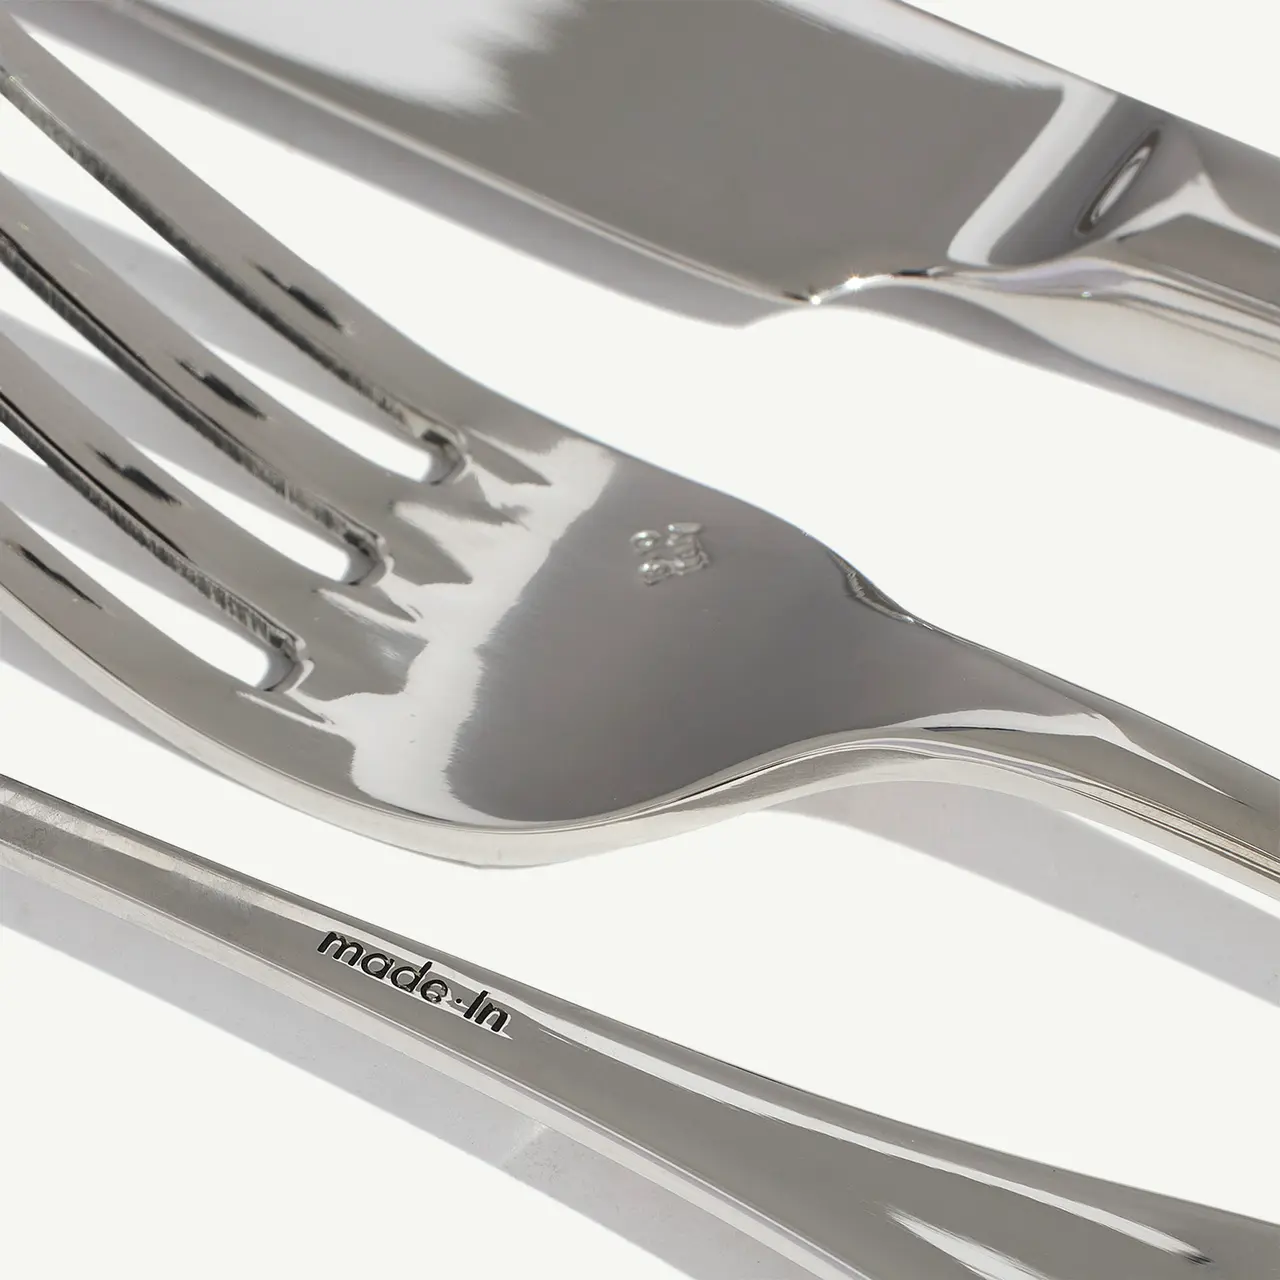 Two shiny silver forks lie on a white surface, reflecting light with a text "made in" visible on one of the handles.